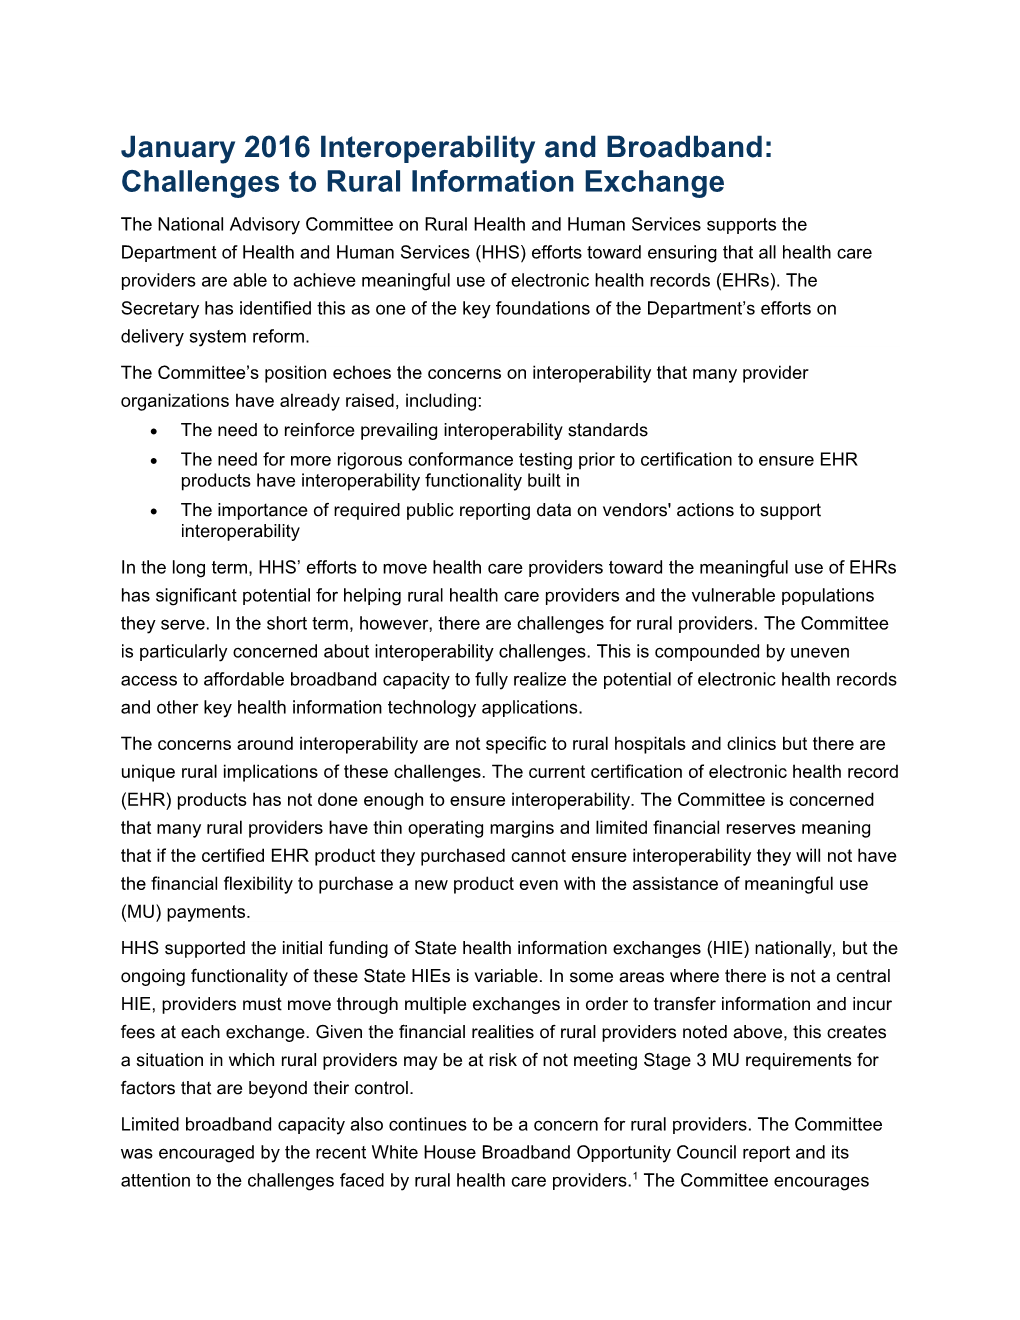 January 2016 Interoperability and Broadband: Challenges to Rural Information Exchange